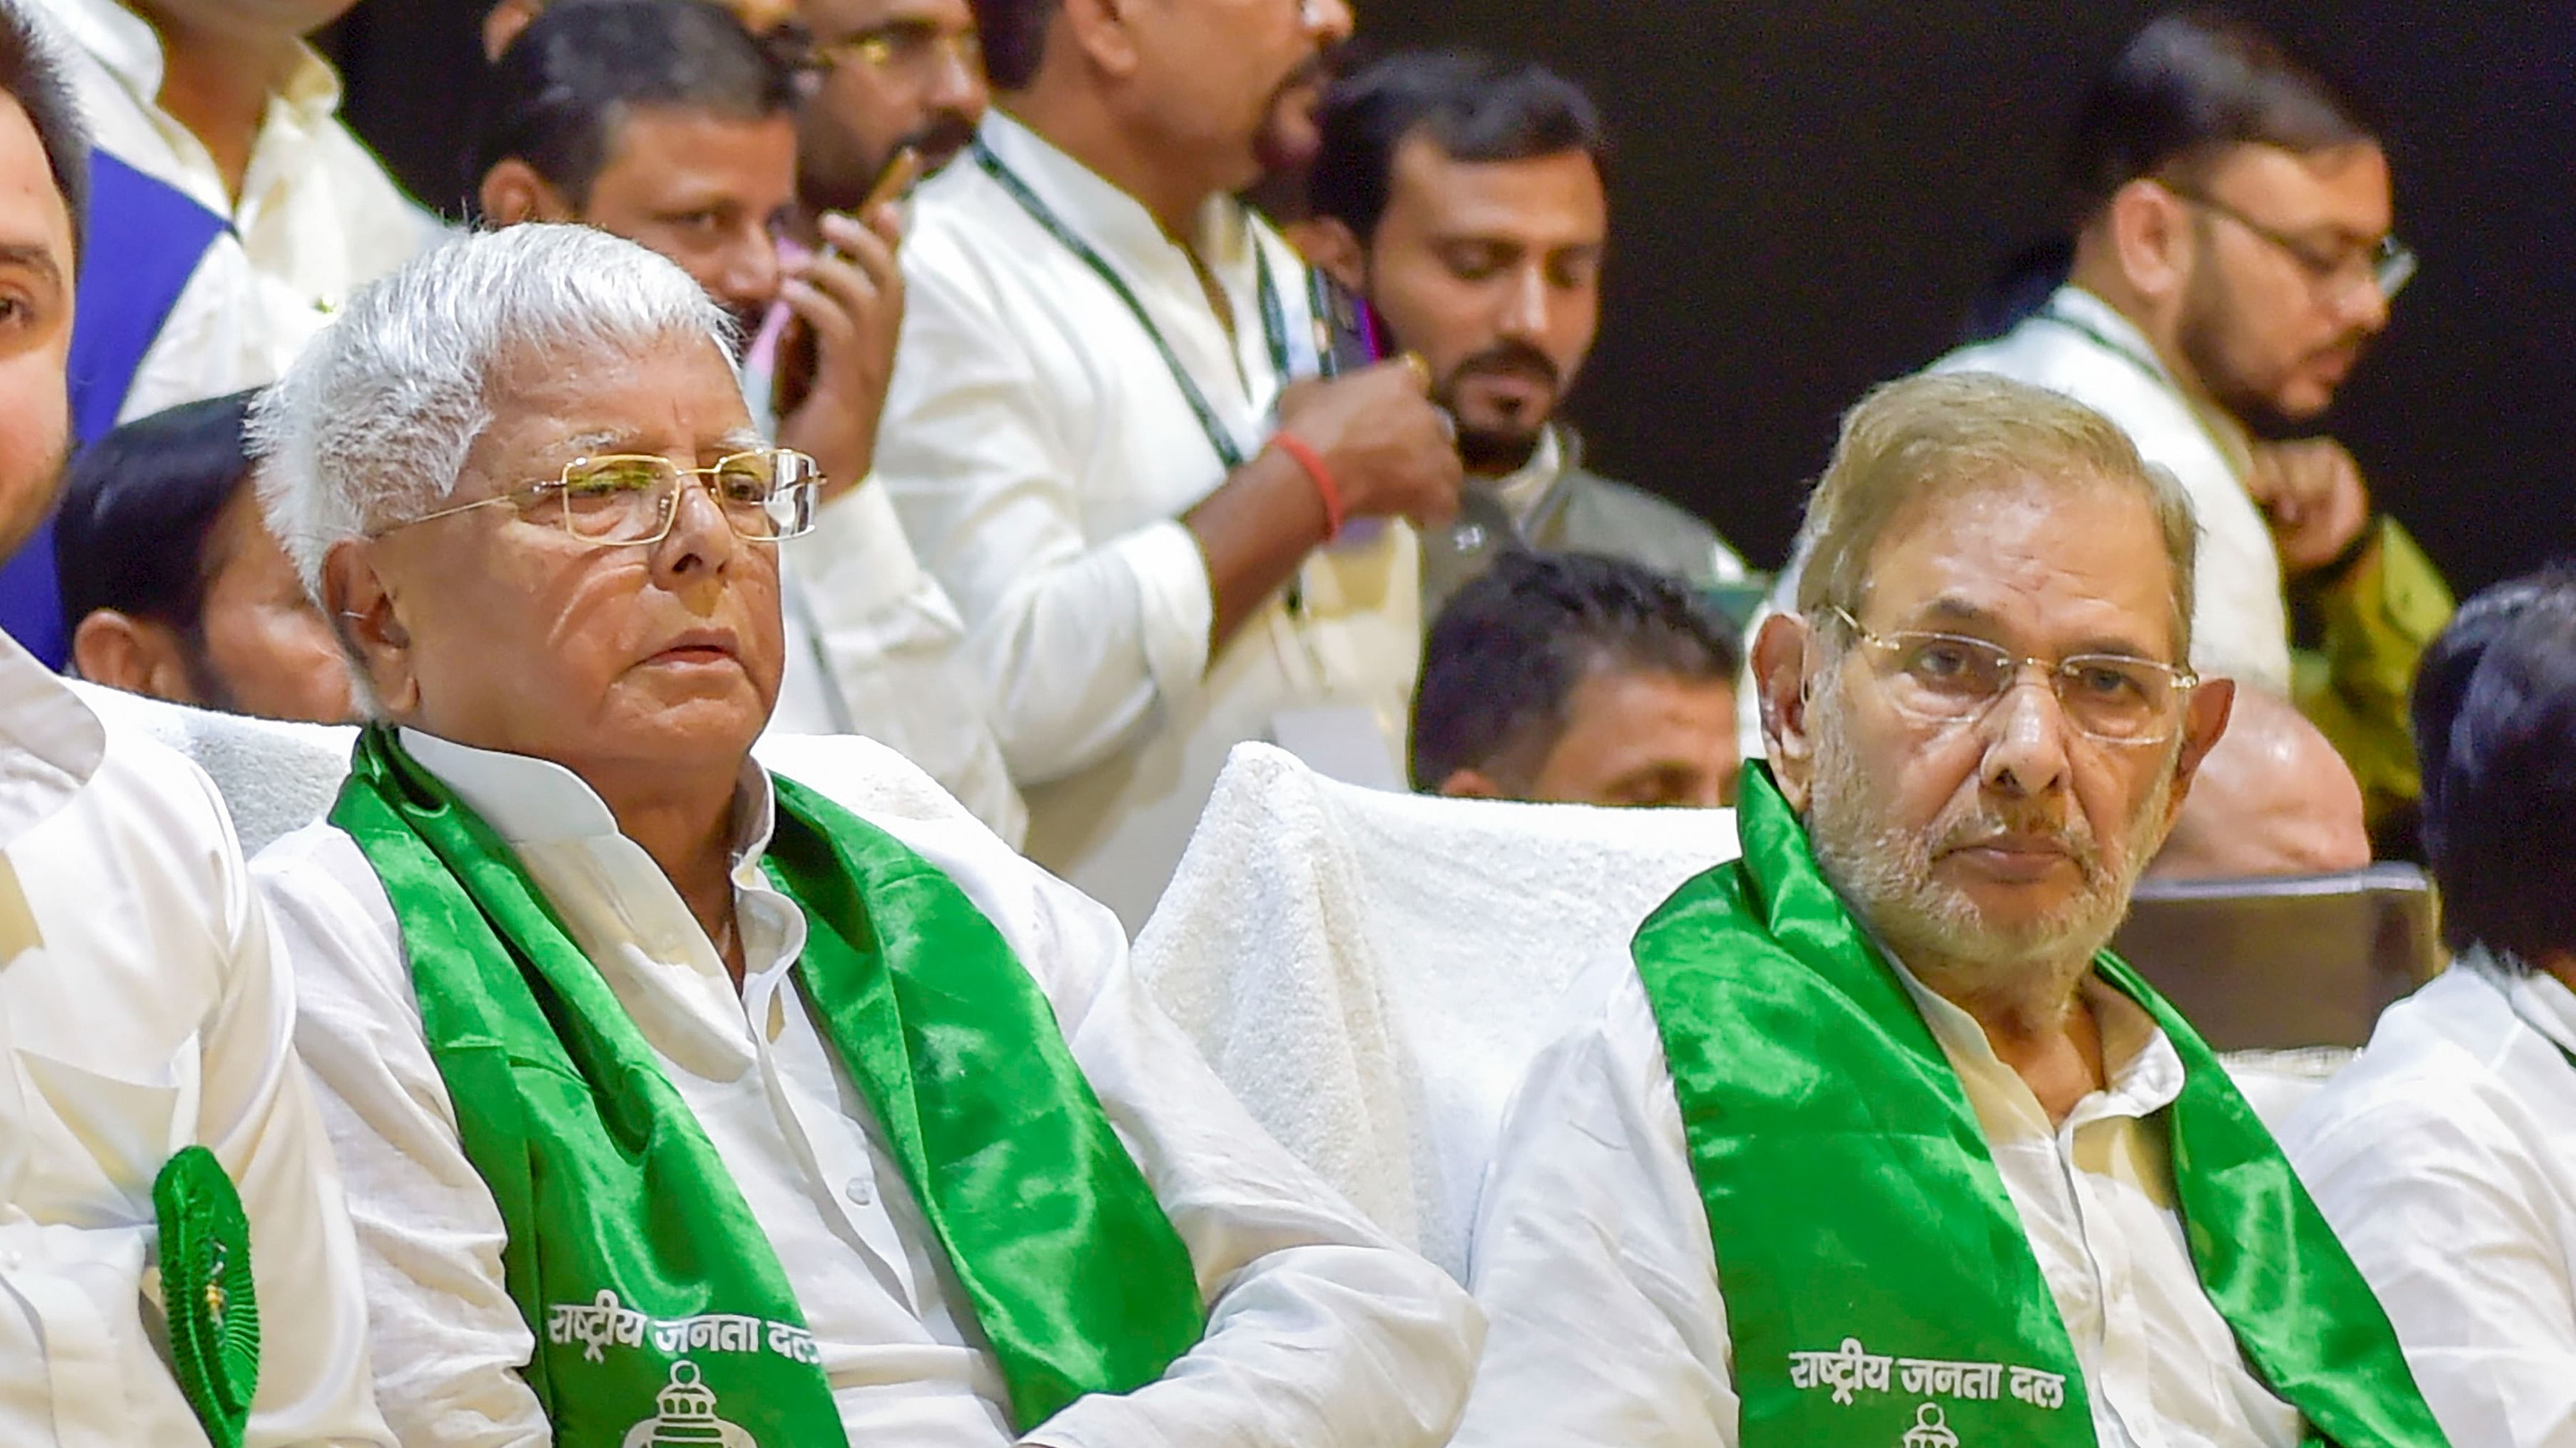 Sharad Yadav on his part is believed to have helped both Lalu Prasad and Ntish Kumar gain access to the top echelons of the Socialist movement in the 1970s. Credit: PTI Photo